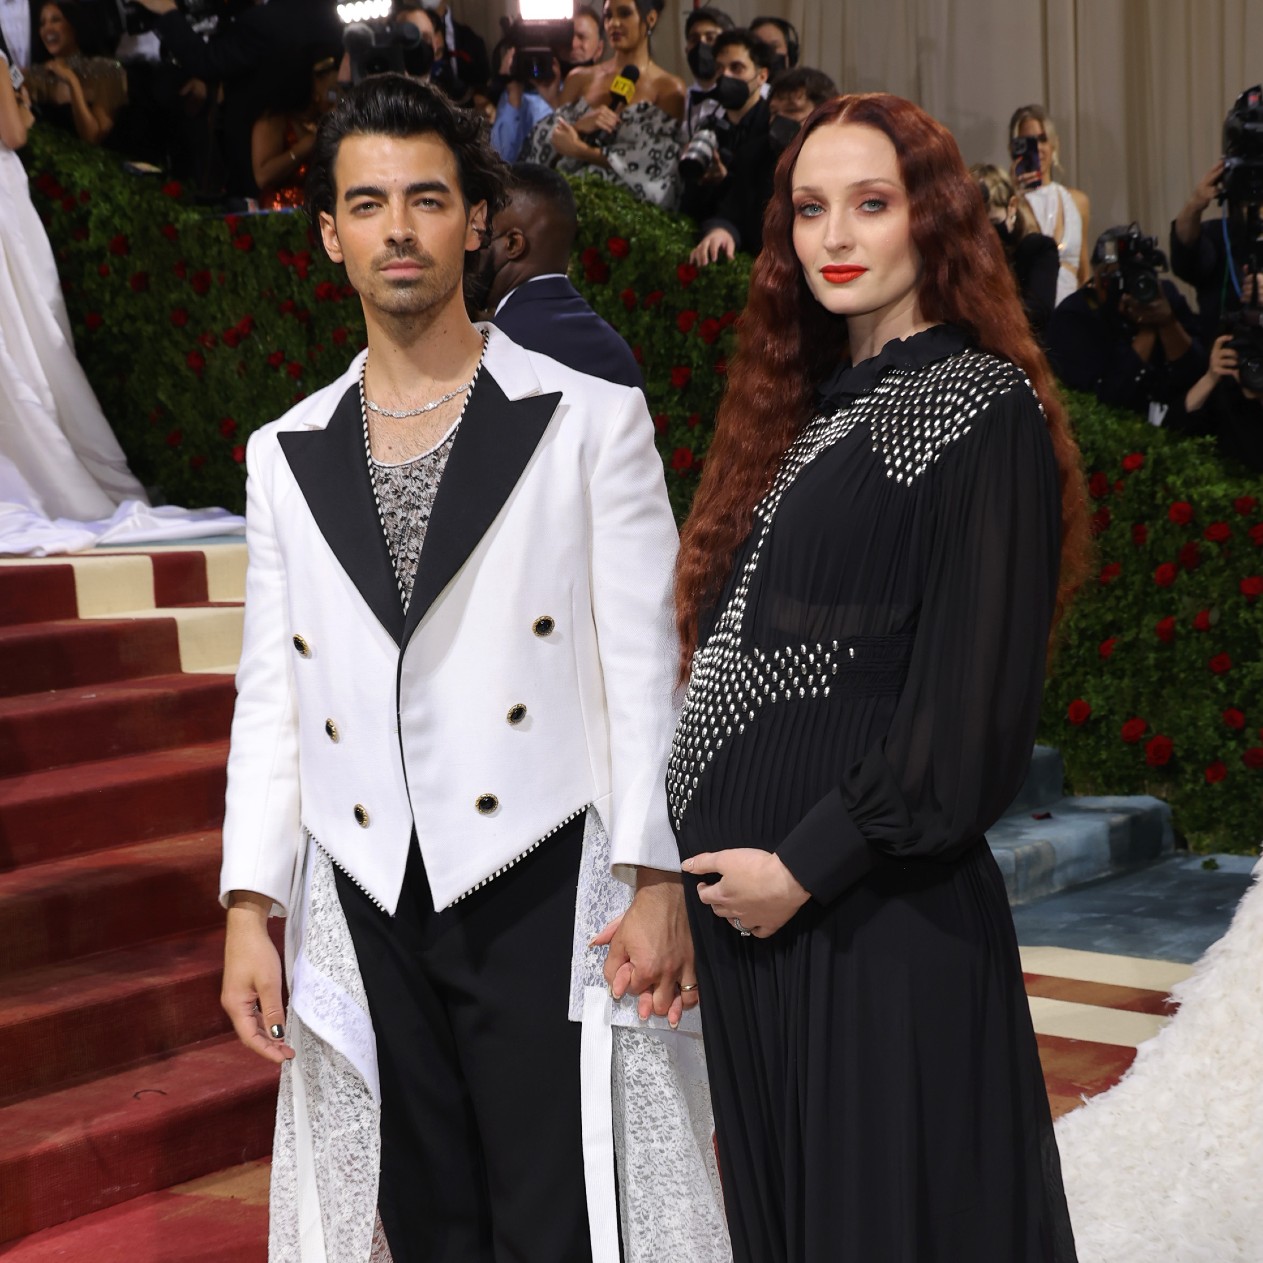 Joe Jonas, Sophie Turner at arrivals for Met Gala Costume Institute Benefit  and Opening of In America: An Anthology of Fashion - Part 5, The  Metropolitan Museum of Art, New York, NY